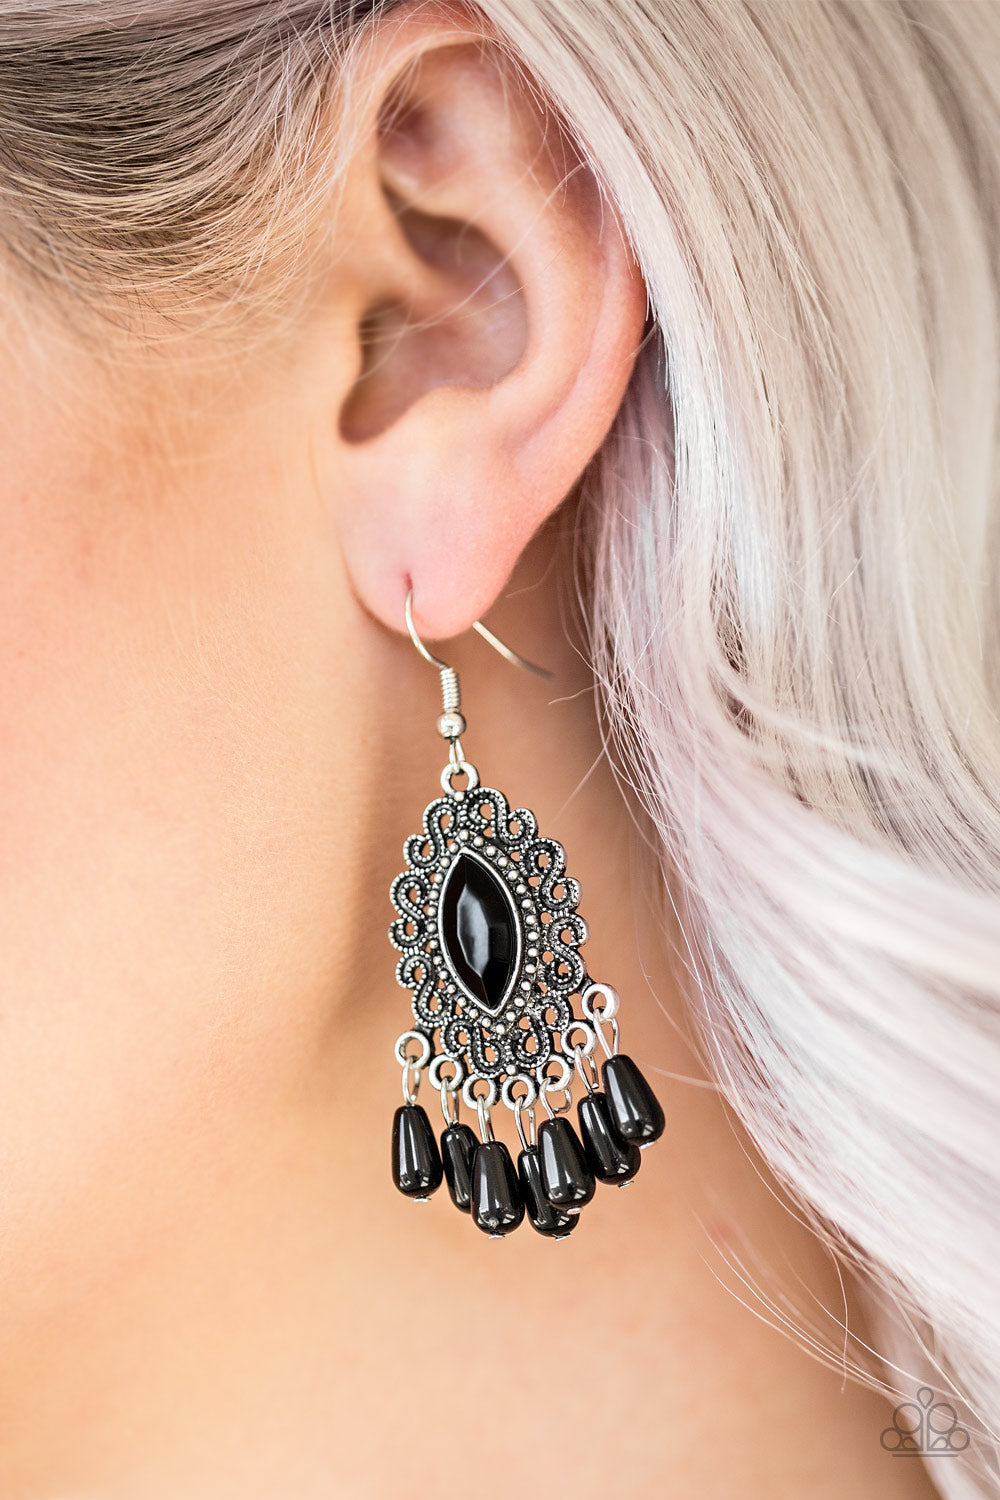 Paparazzi Private Villa Black $5 Earrings Paparazzi Accessories. #P5WH-BKXX-167XX. Subscribe & Save